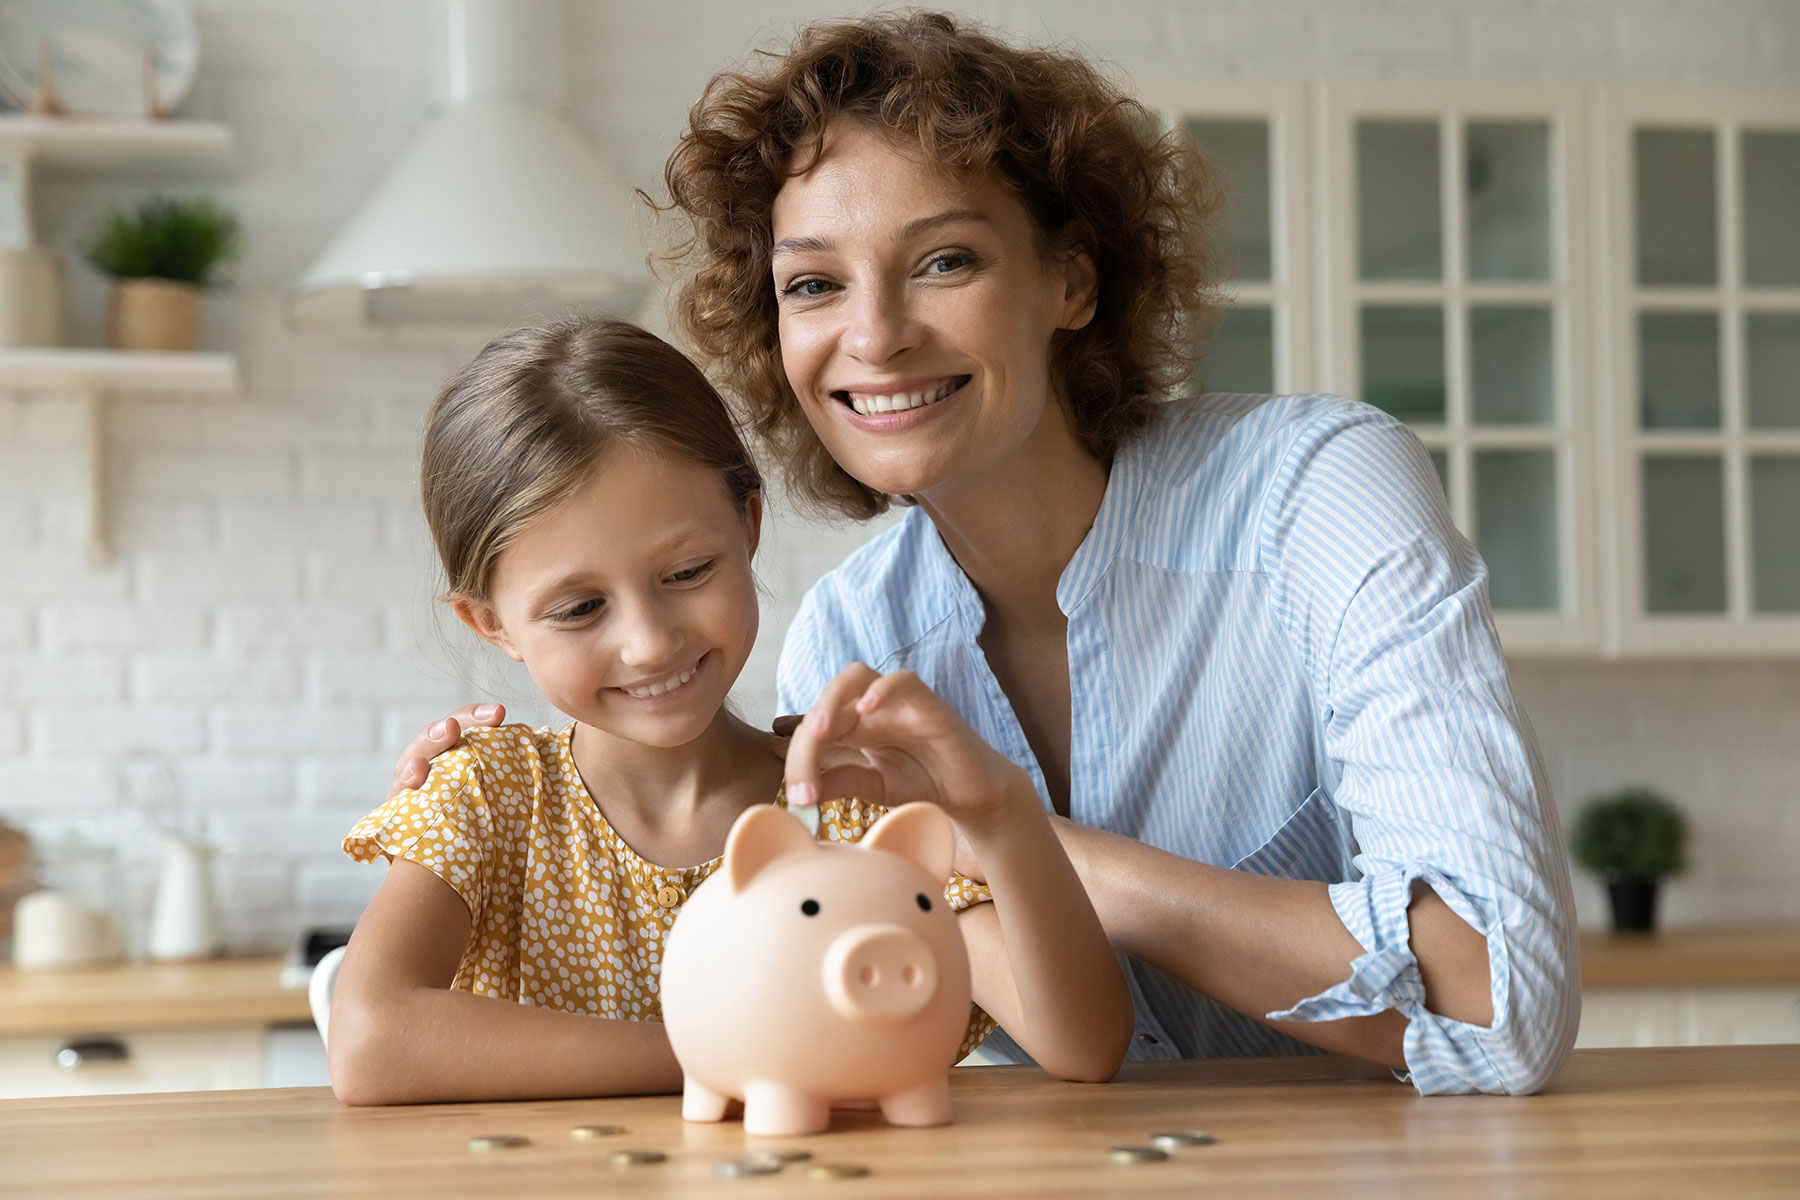 Happy smiling mom cuddling young smiling girl putting coin into pink piggybank.